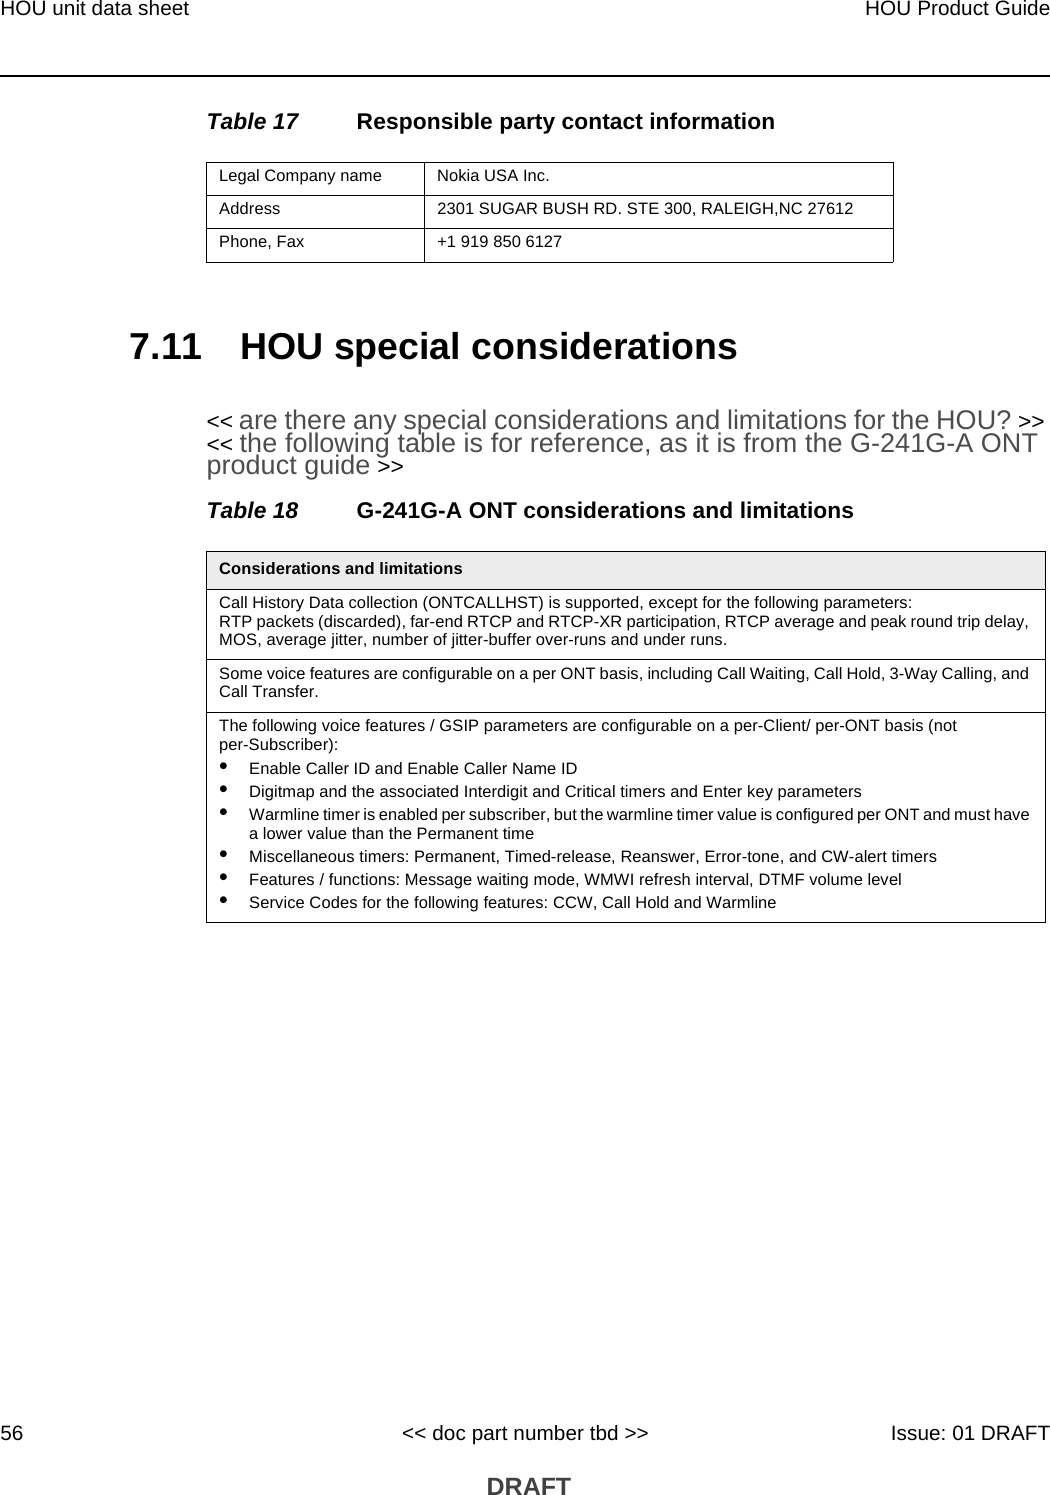 HOU unit data sheet56HOU Product Guide&lt;&lt; doc part number tbd &gt;&gt; Issue: 01 DRAFT DRAFTTable 17 Responsible party contact information7.11 HOU special considerations&lt;&lt; are there any special considerations and limitations for the HOU? &gt;&gt; &lt;&lt; the following table is for reference, as it is from the G-241G-A ONT product guide &gt;&gt;Table 18 G-241G-A ONT considerations and limitationsLegal Company name Nokia USA Inc.Address 2301 SUGAR BUSH RD. STE 300, RALEIGH,NC 27612Phone, Fax +1 919 850 6127Considerations and limitationsCall History Data collection (ONTCALLHST) is supported, except for the following parameters: RTP packets (discarded), far-end RTCP and RTCP-XR participation, RTCP average and peak round trip delay, MOS, average jitter, number of jitter-buffer over-runs and under runs.Some voice features are configurable on a per ONT basis, including Call Waiting, Call Hold, 3-Way Calling, and Call Transfer.The following voice features / GSIP parameters are configurable on a per-Client/ per-ONT basis (not per-Subscriber):•Enable Caller ID and Enable Caller Name ID•Digitmap and the associated Interdigit and Critical timers and Enter key parameters•Warmline timer is enabled per subscriber, but the warmline timer value is configured per ONT and must have a lower value than the Permanent time•Miscellaneous timers: Permanent, Timed-release, Reanswer, Error-tone, and CW-alert timers•Features / functions: Message waiting mode, WMWI refresh interval, DTMF volume level•Service Codes for the following features: CCW, Call Hold and Warmline